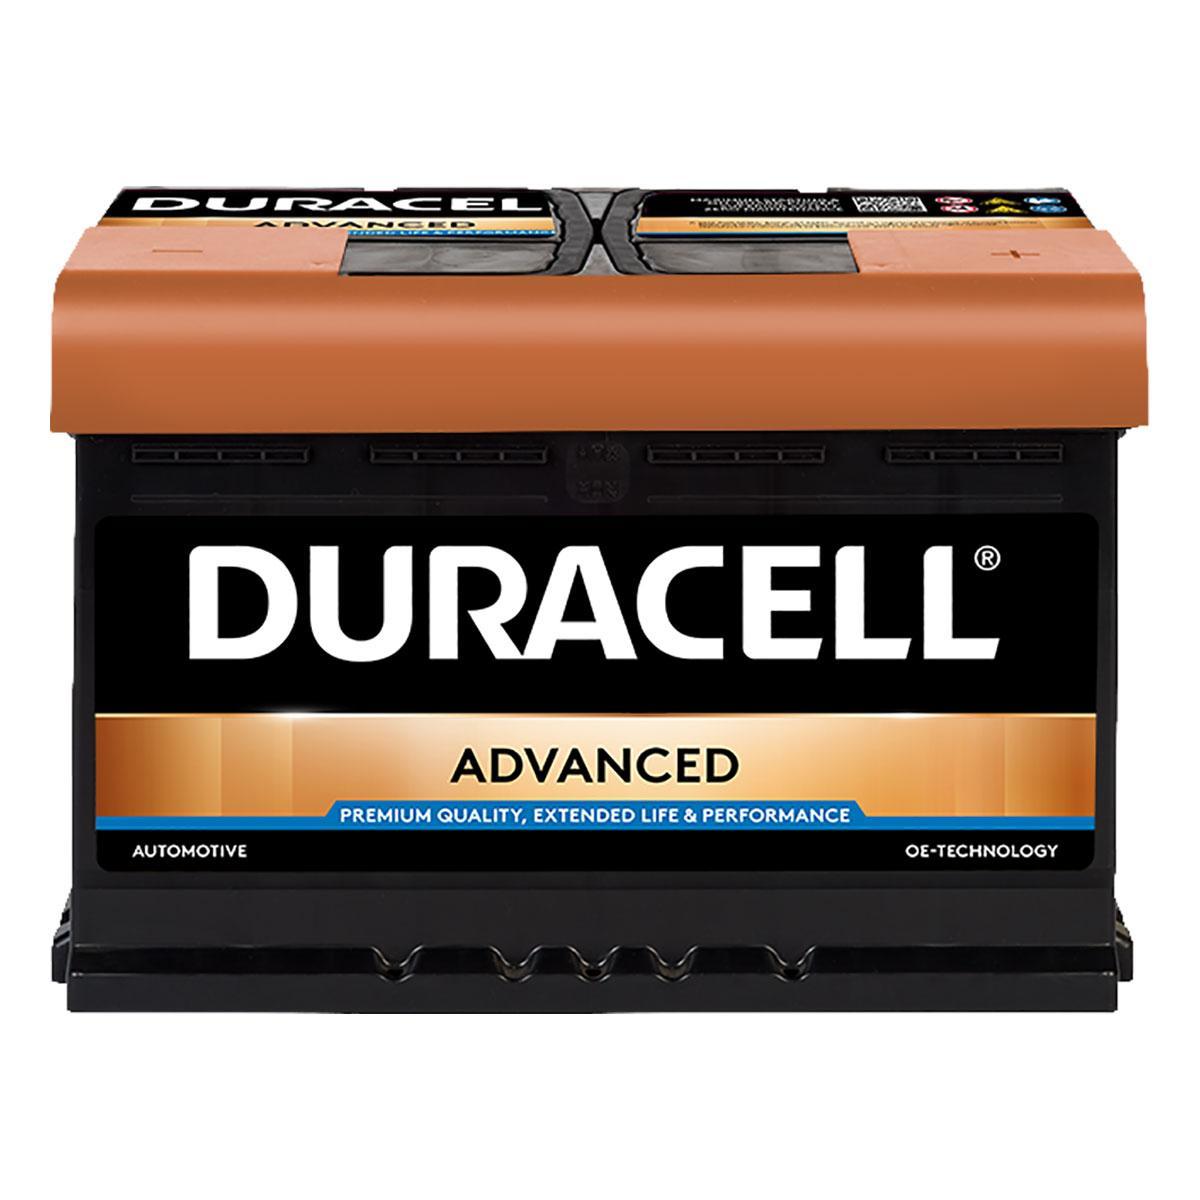 duracell-100-da72-advanced-car-battery-free-uk-mainland-delivery